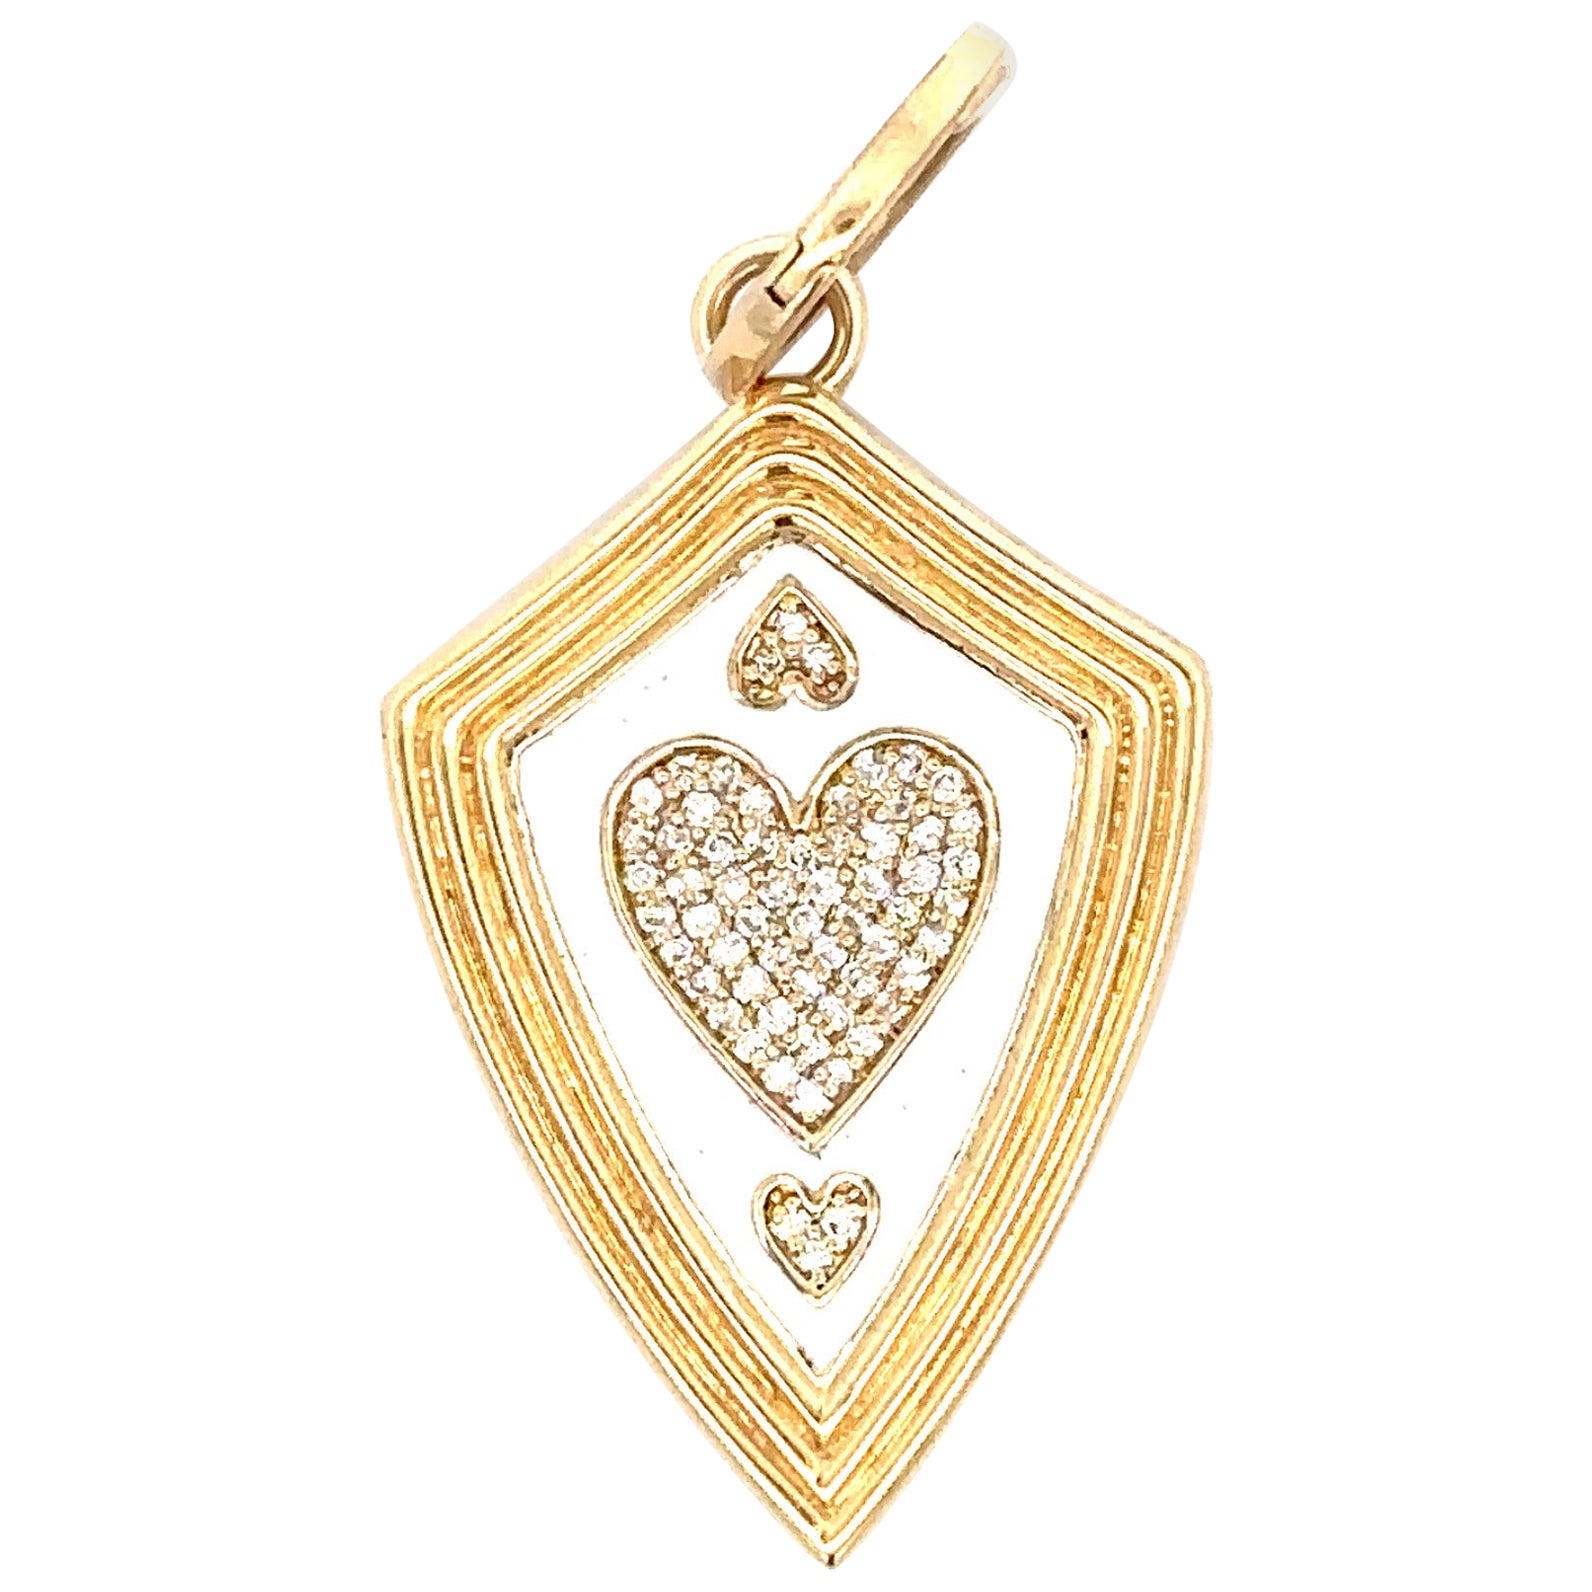 One of a Kind White Ceramic Pavé Heart Shield Hinged Charm - Y14